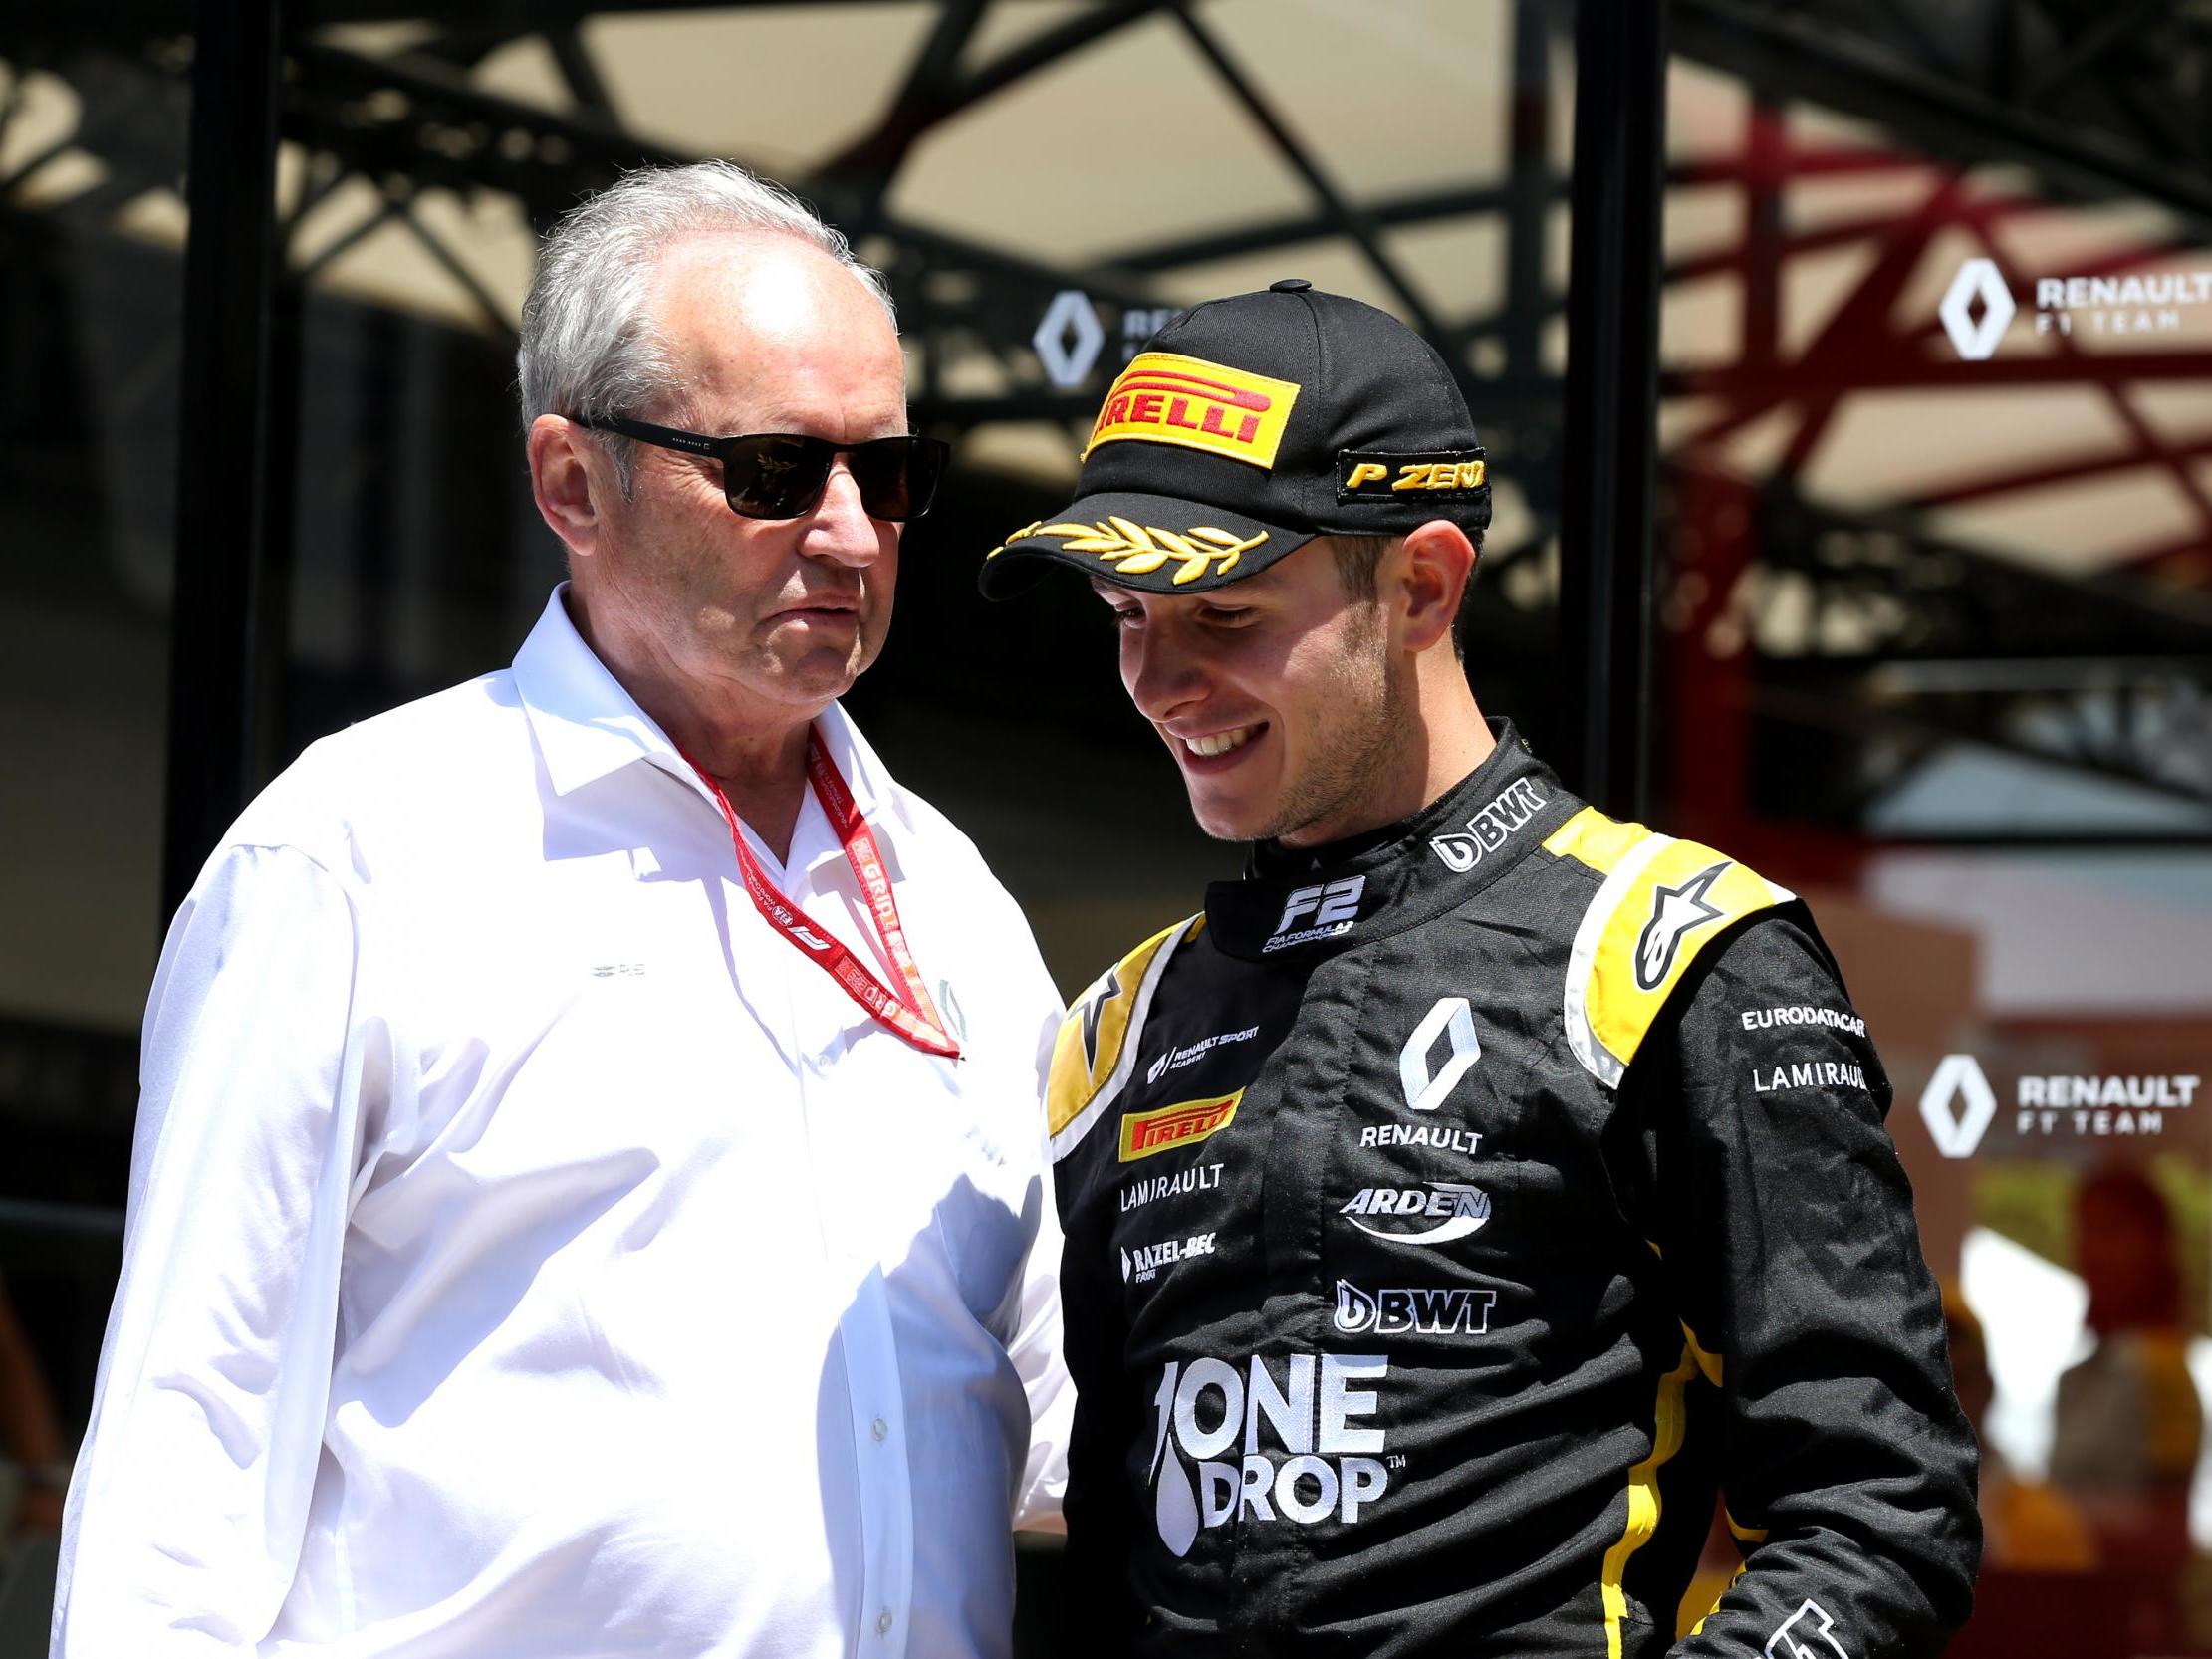 Anthoine Hubert died during the F2 Belgian Grand Prix feature race